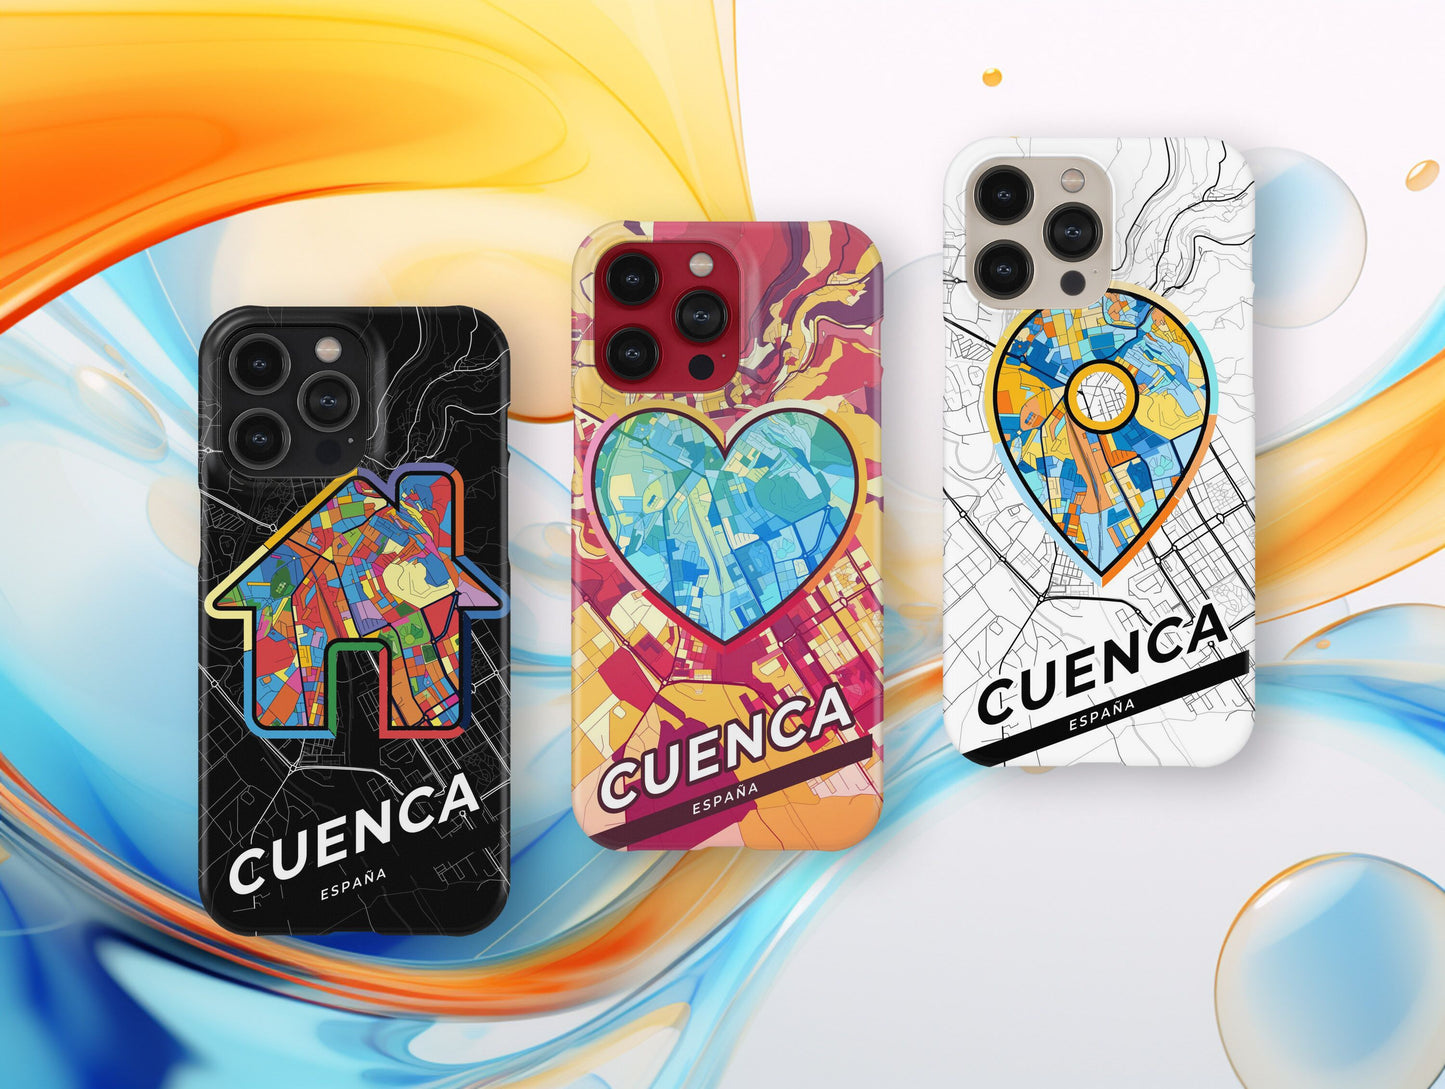 Cuenca Spain slim phone case with colorful icon. Birthday, wedding or housewarming gift. Couple match cases.